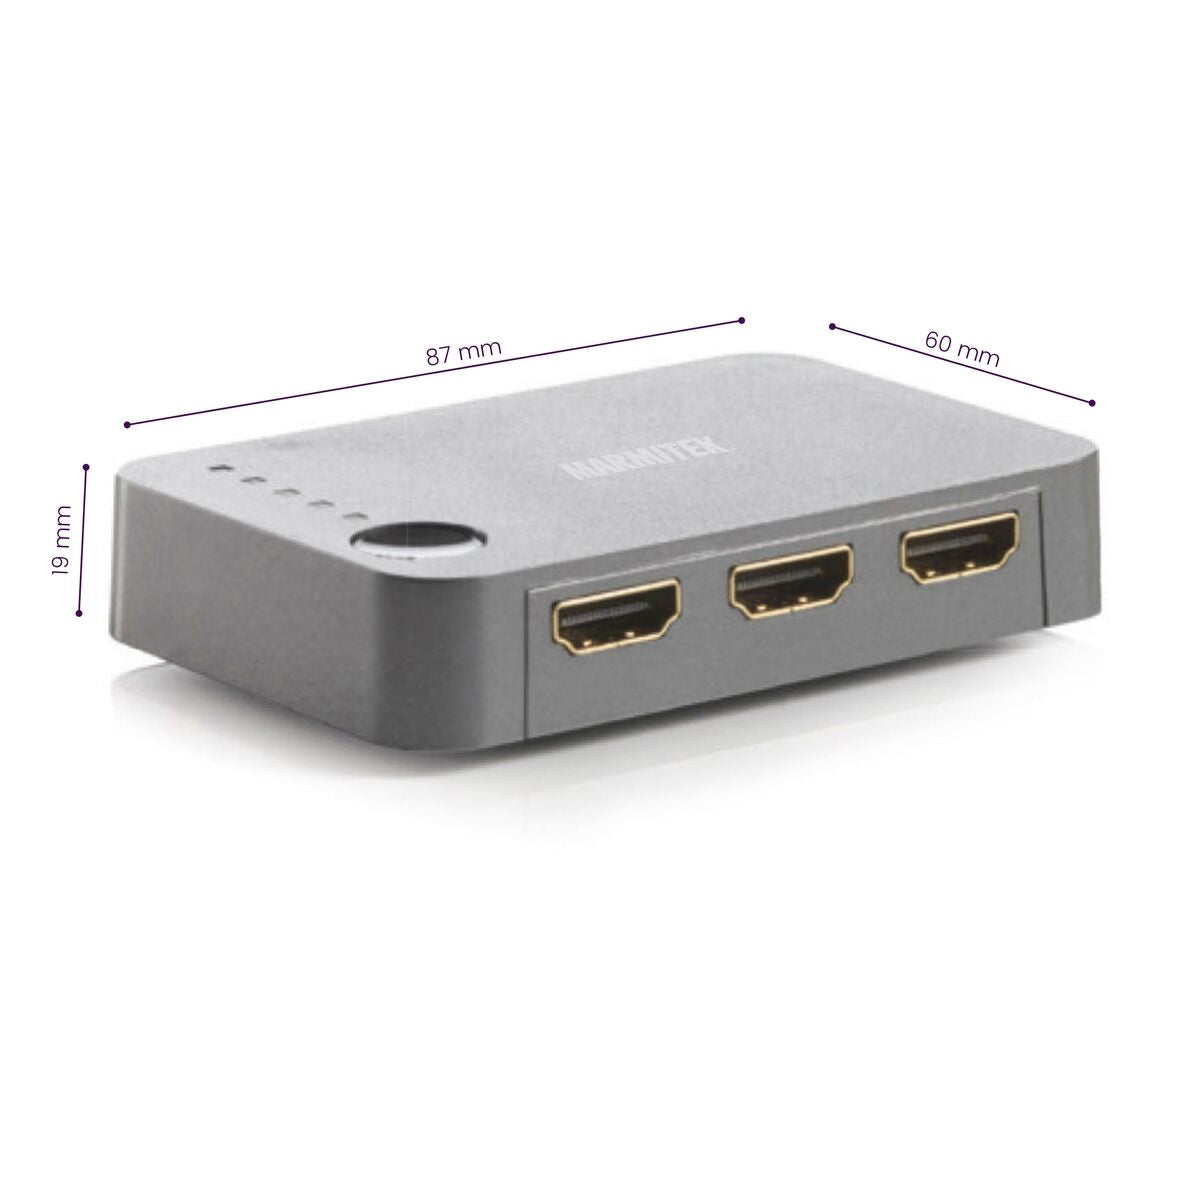 Connect 350 UHD - HDMI switch 4K - 5 in / 1 out